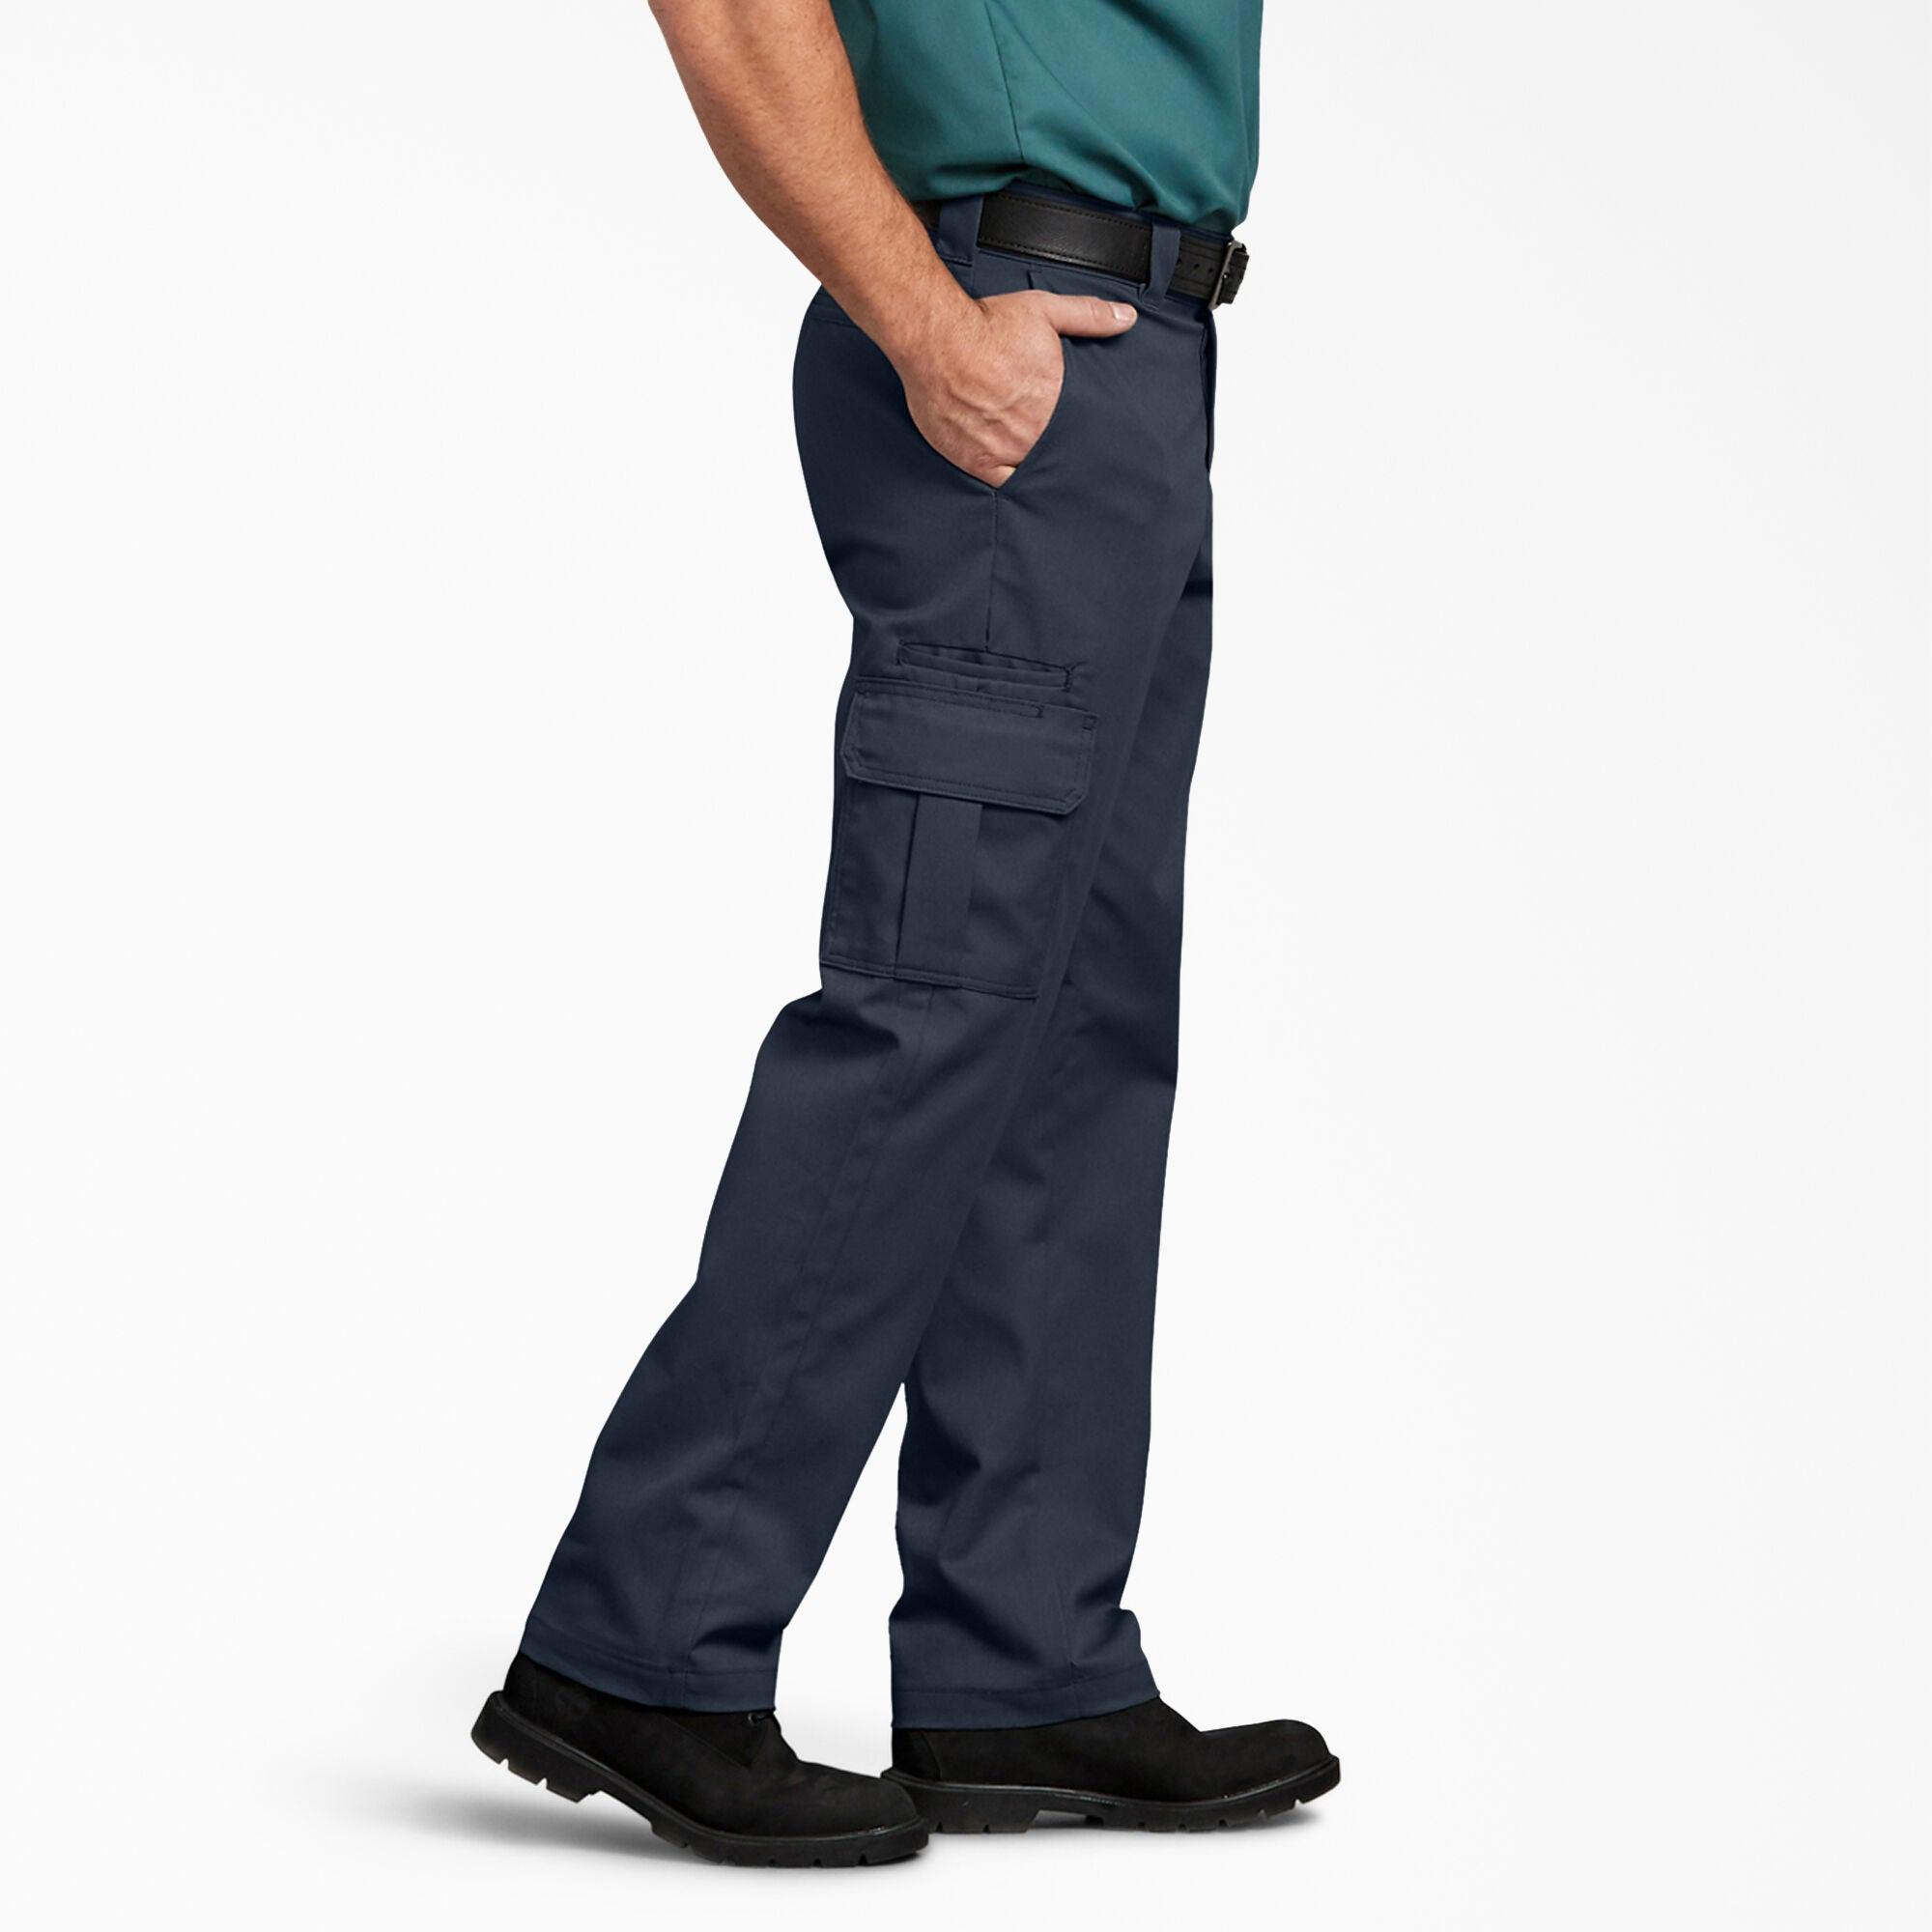 Men's Dickies Relaxed Fit Cargo Work Pants